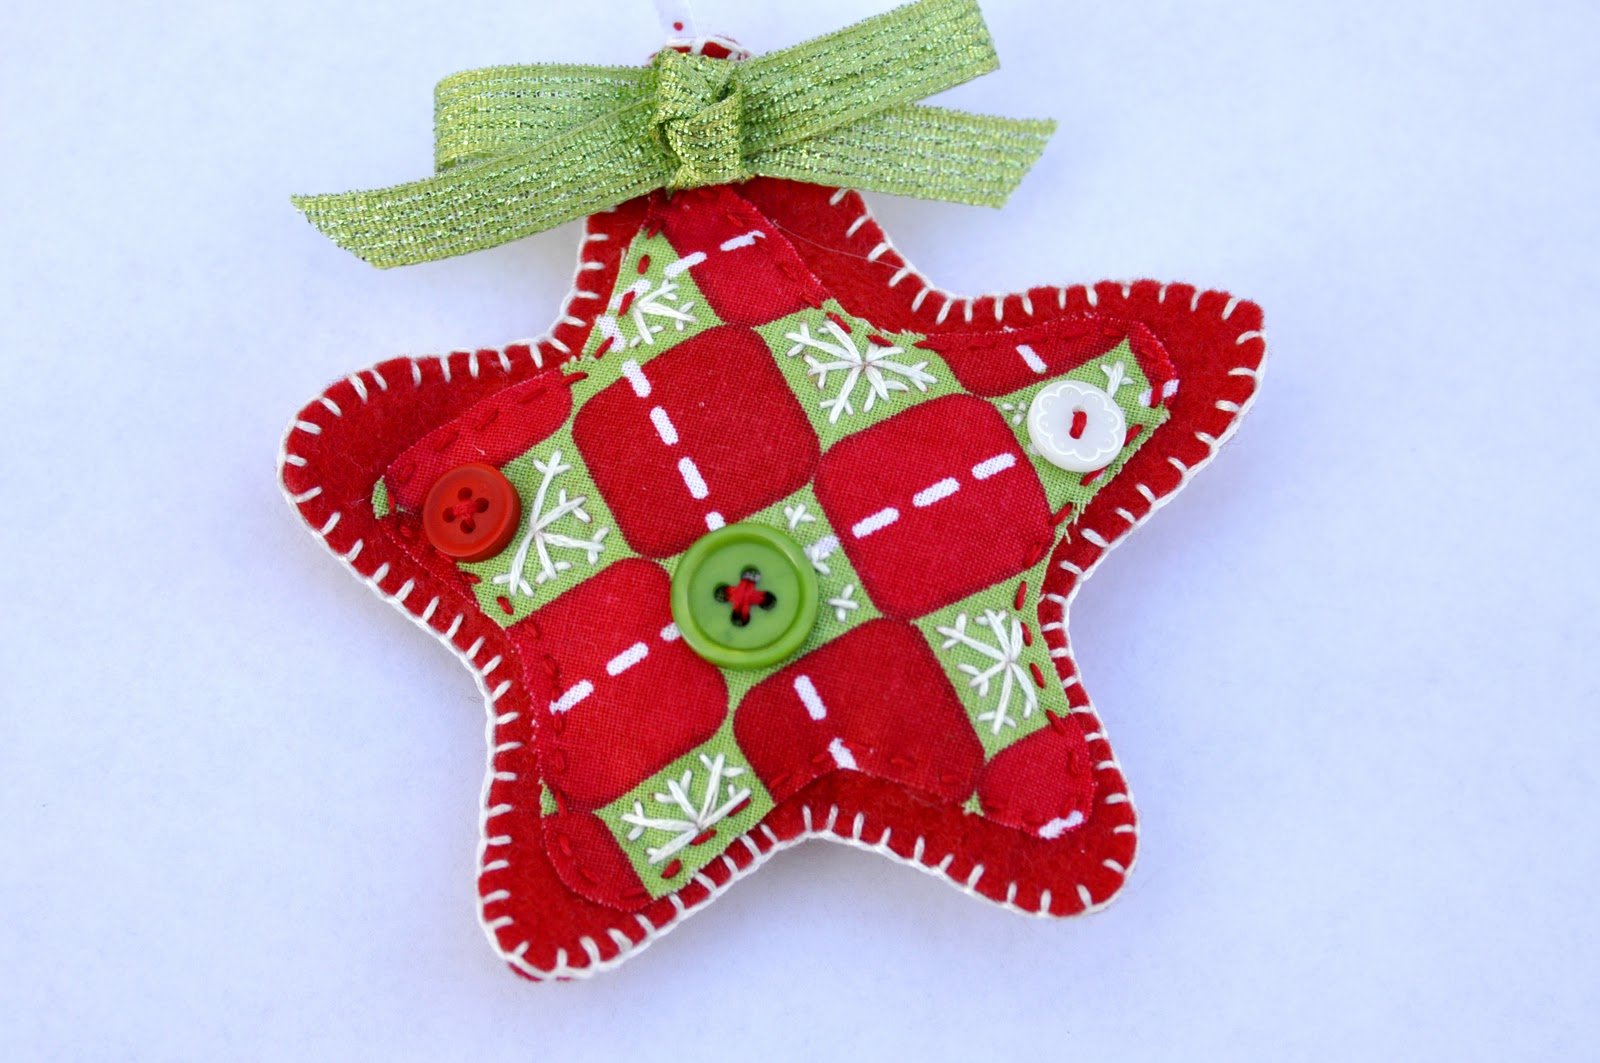 Making Christmas Ornaments with Felt at Home